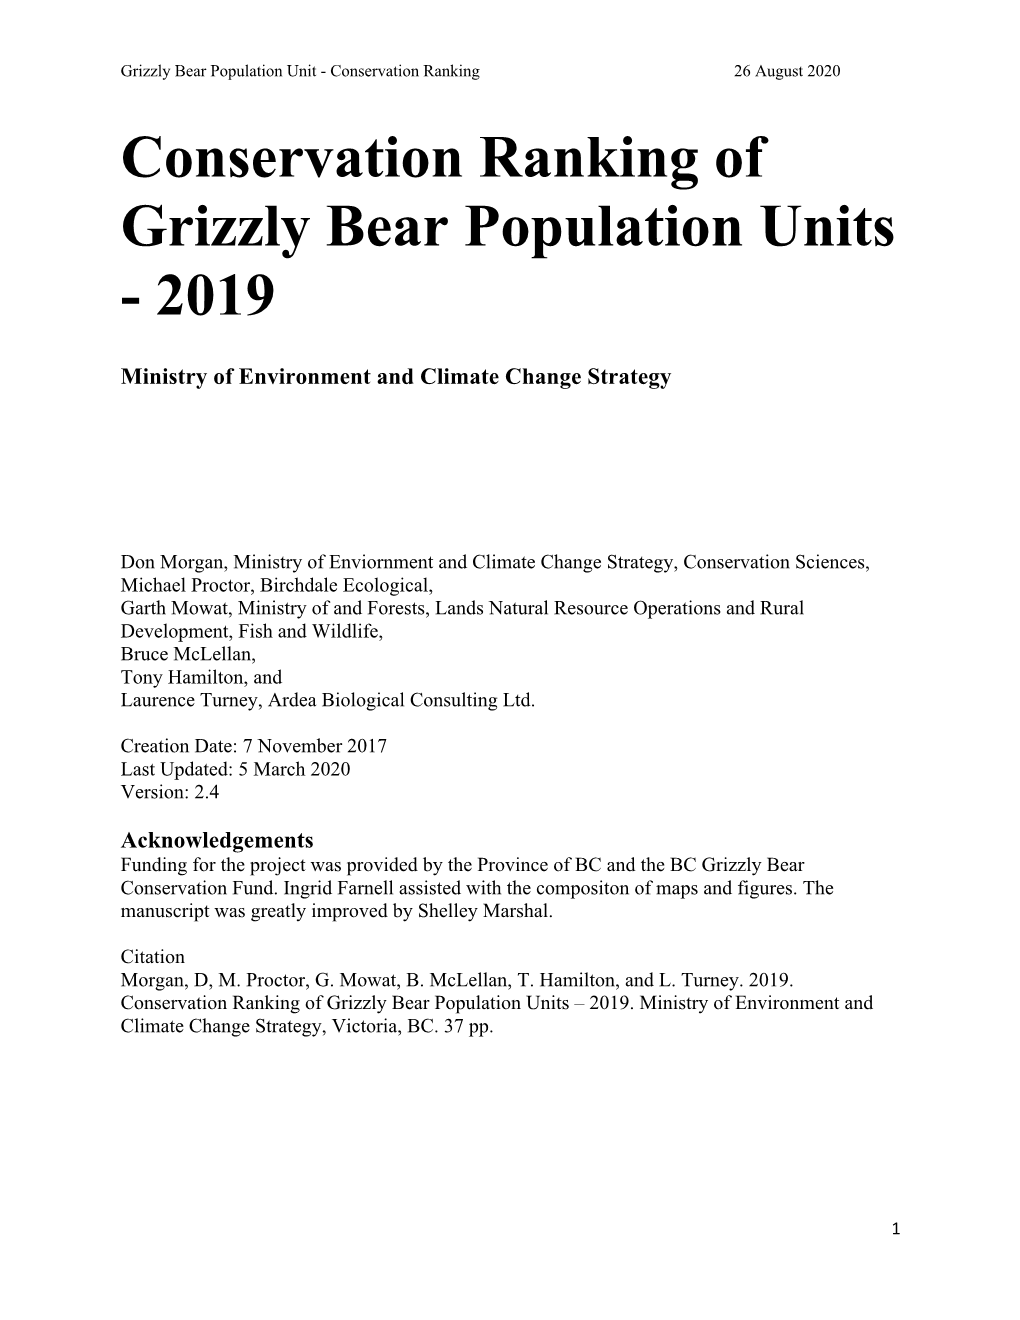 Conservation Ranking of Grizzly Bear Population Units - 2019